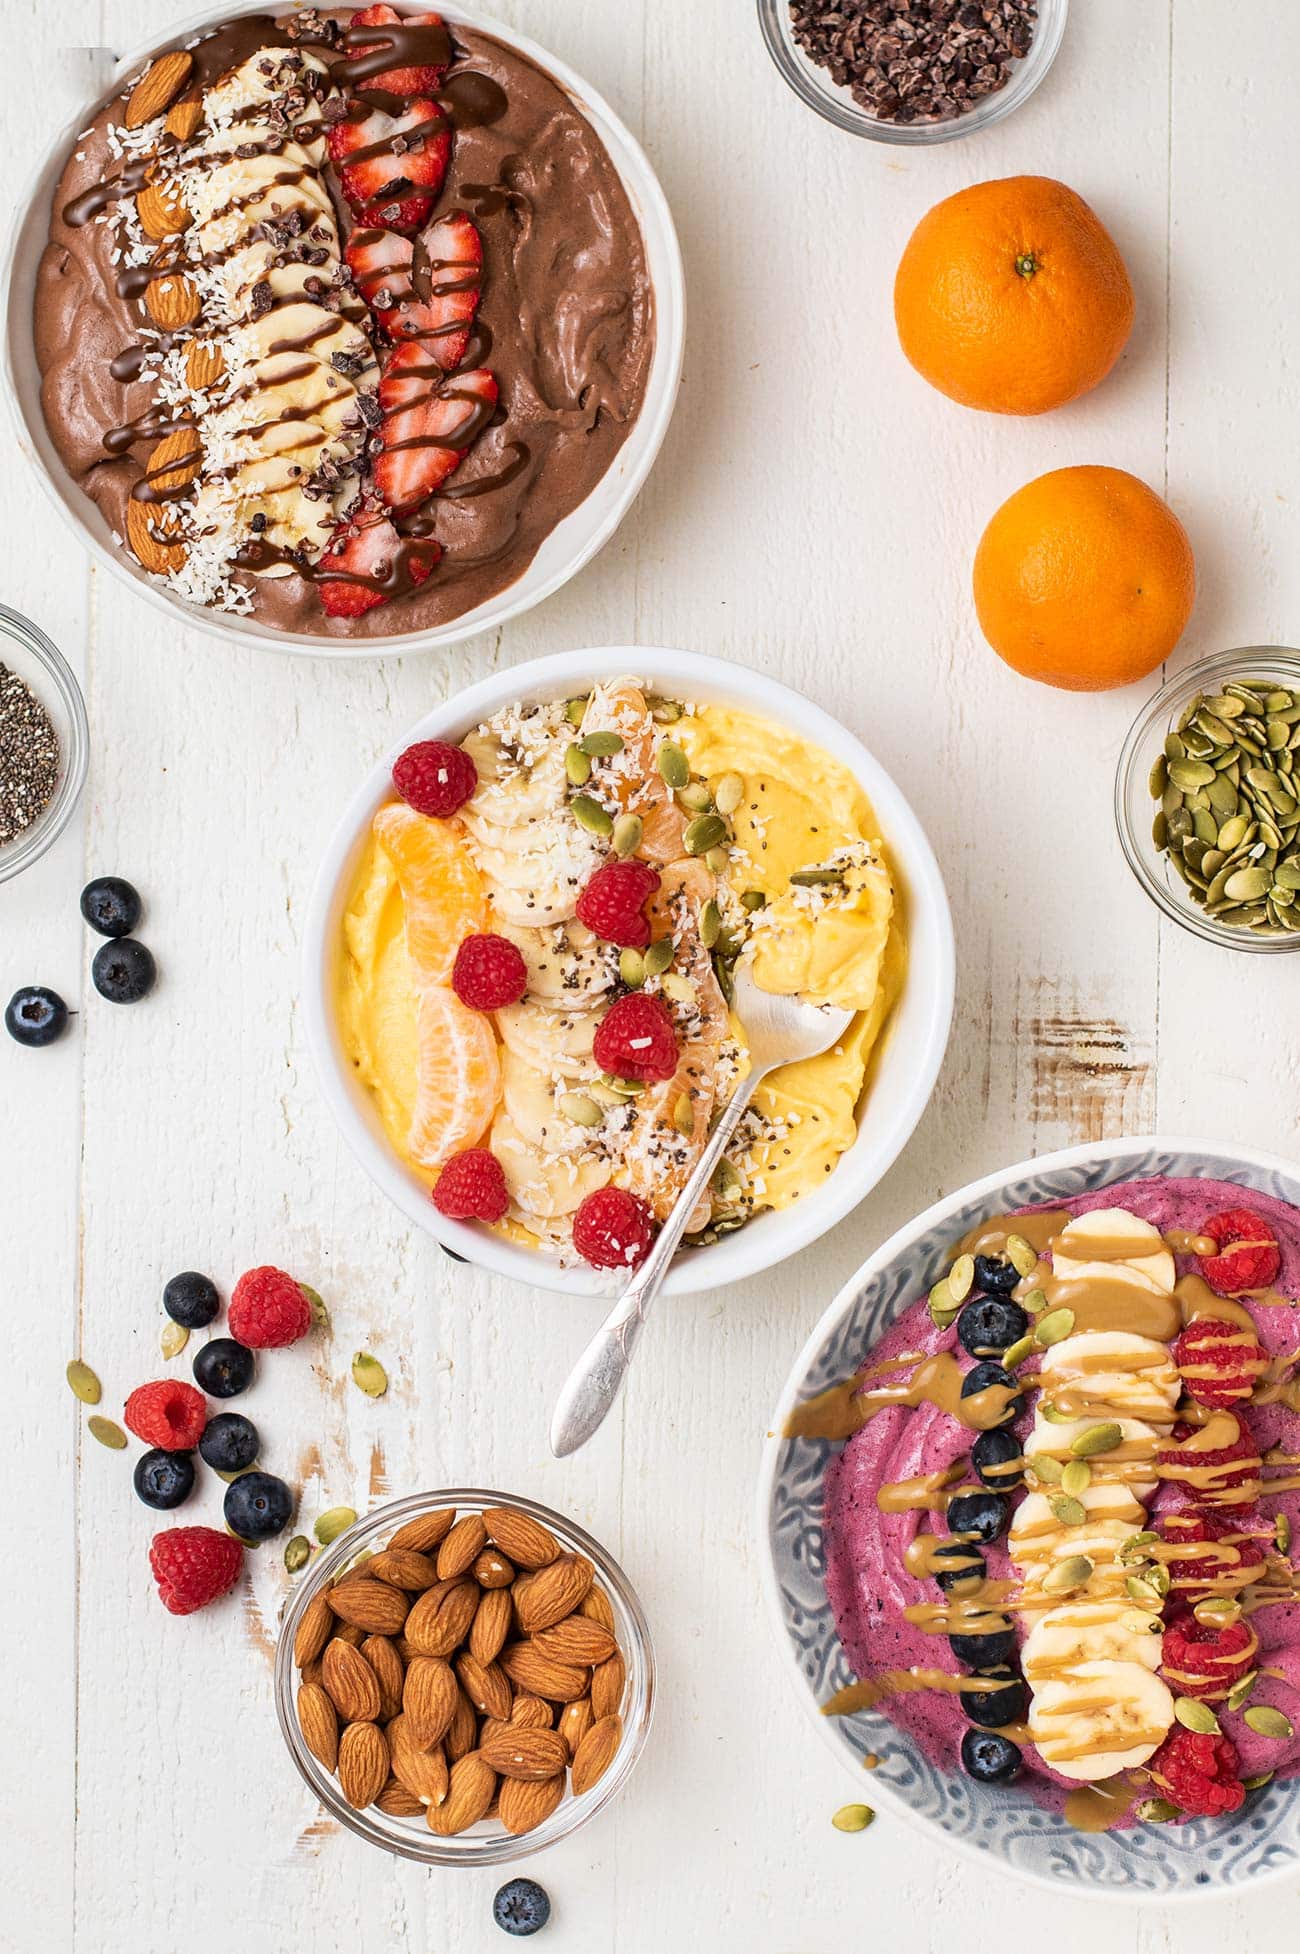 How to Make Thick Smoothie Bowls